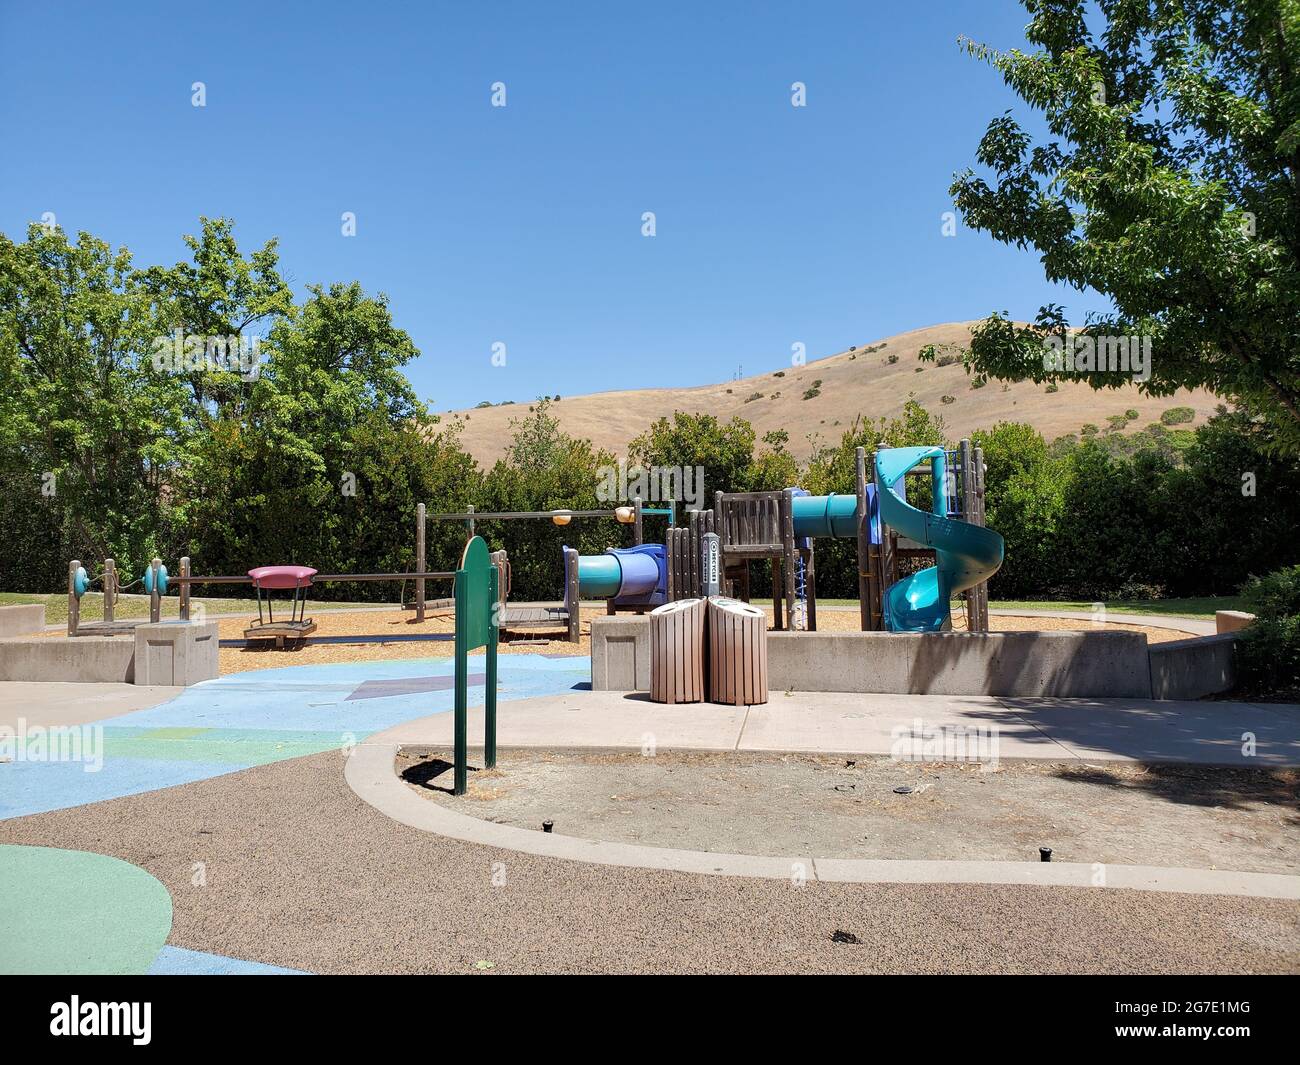 Structures and natural elements are visible at Diablo Vista Park in San Ramon, California, June 7, 2021. () Stock Photo